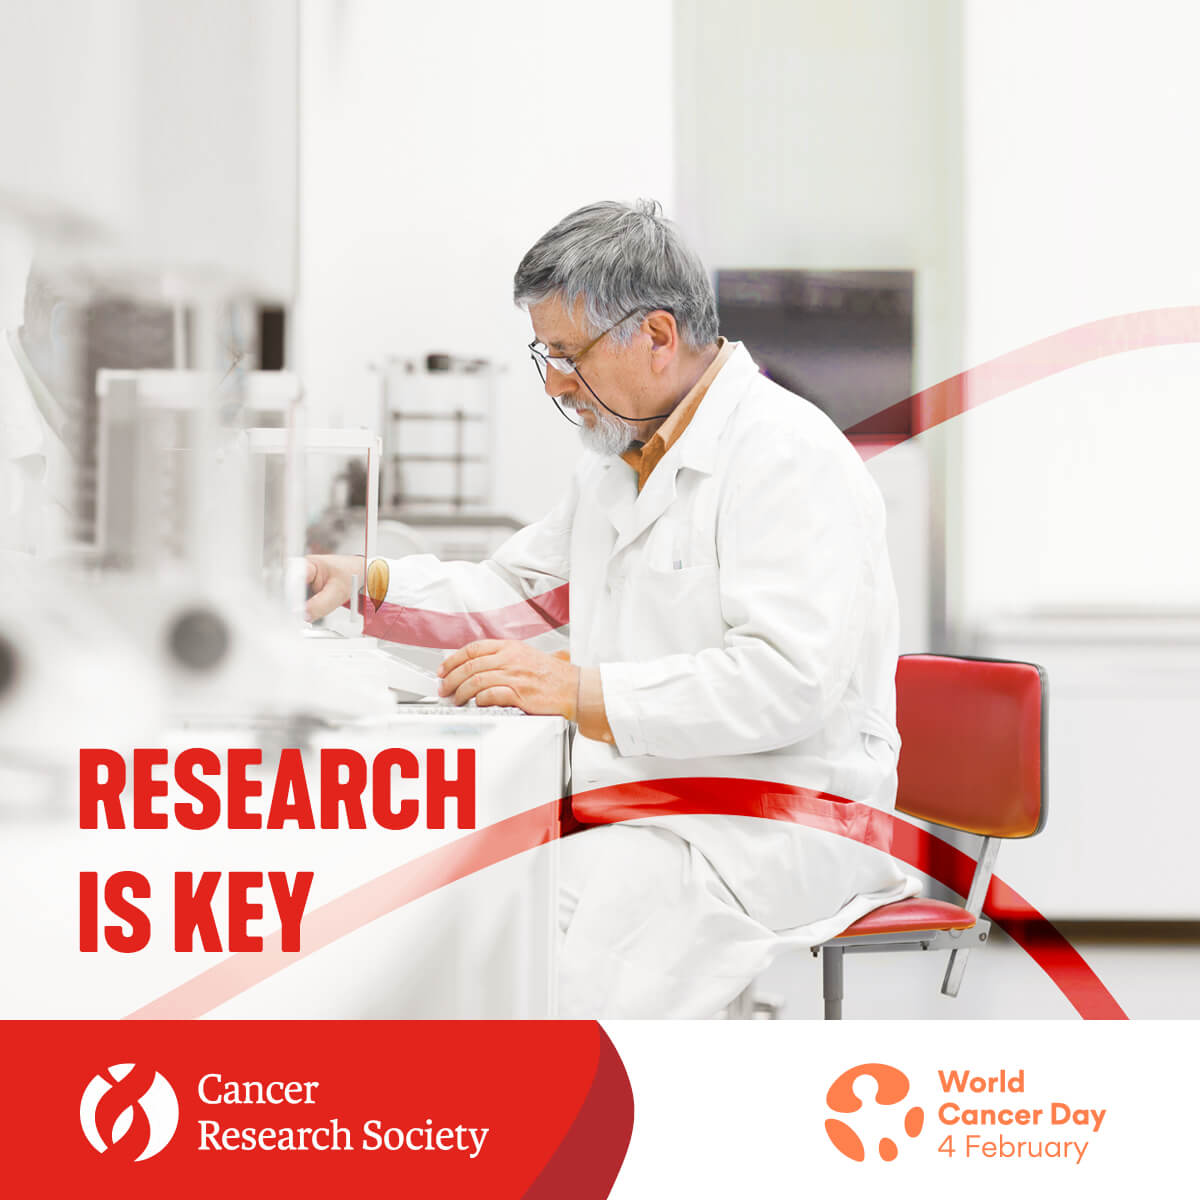 ❗Around 45% of Canadians will be diagnosed with cancer in their lifetime, and 1 in 4 will die from it. 💪For #WorldCancerDay, change the statistics! Give to research that saves lives: loom.ly/vnzOVCY #CancerResearchSociety